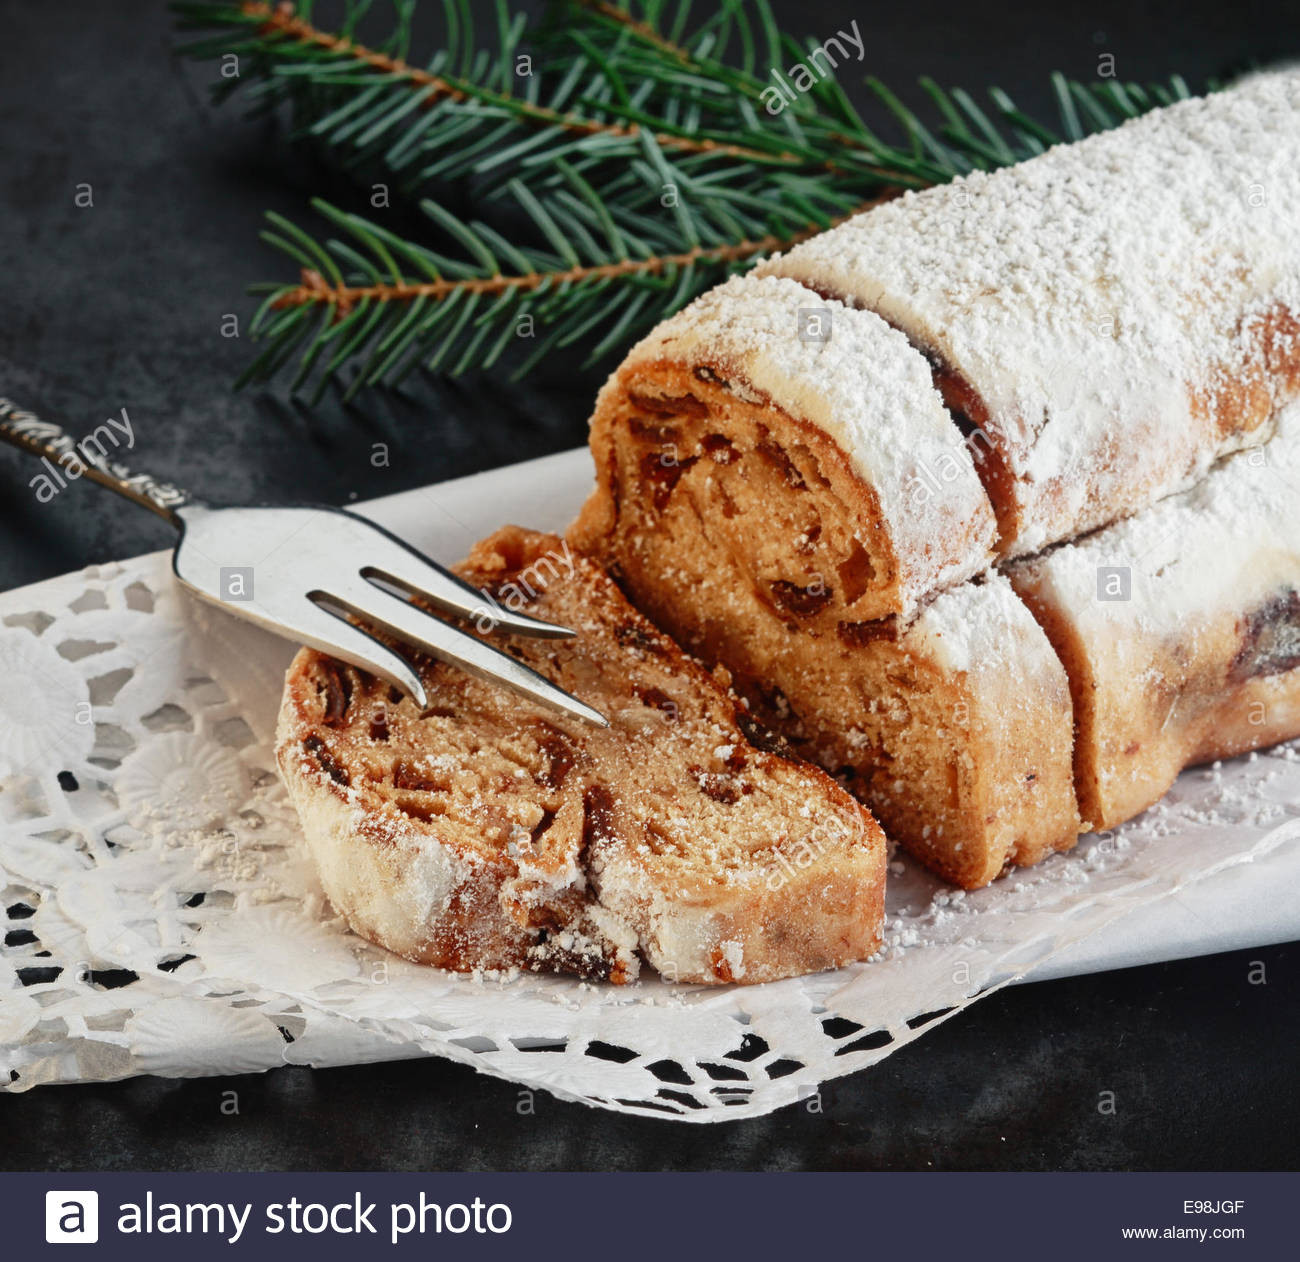 Italian Sweet Bread Loaf Made For Christmas
 Loaf Bread Art Stock s & Loaf Bread Art Stock